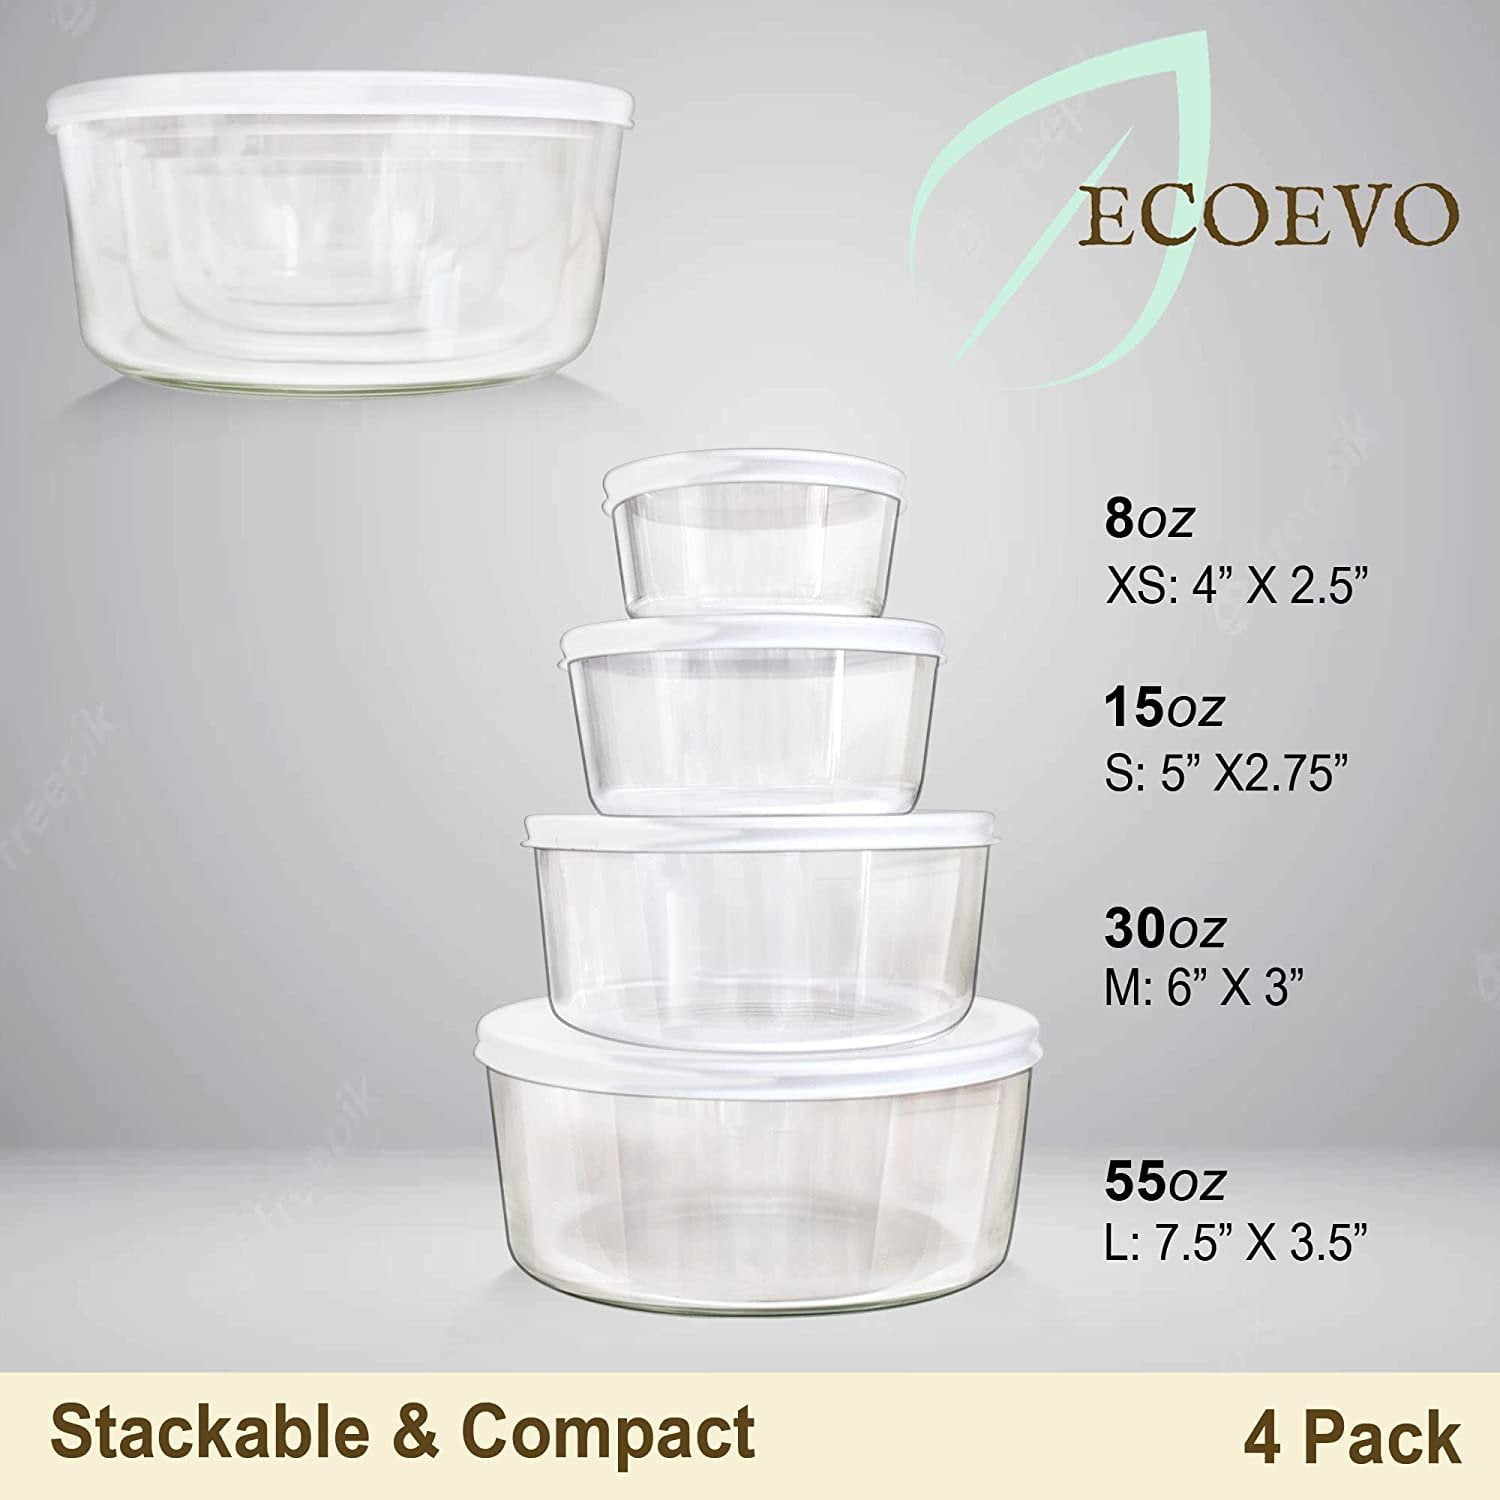 Large Glass Food Storage Container - Baking Containers with Hinged Locking  Lids. 100% Leak Proof. 12 Cups / 3000 ml